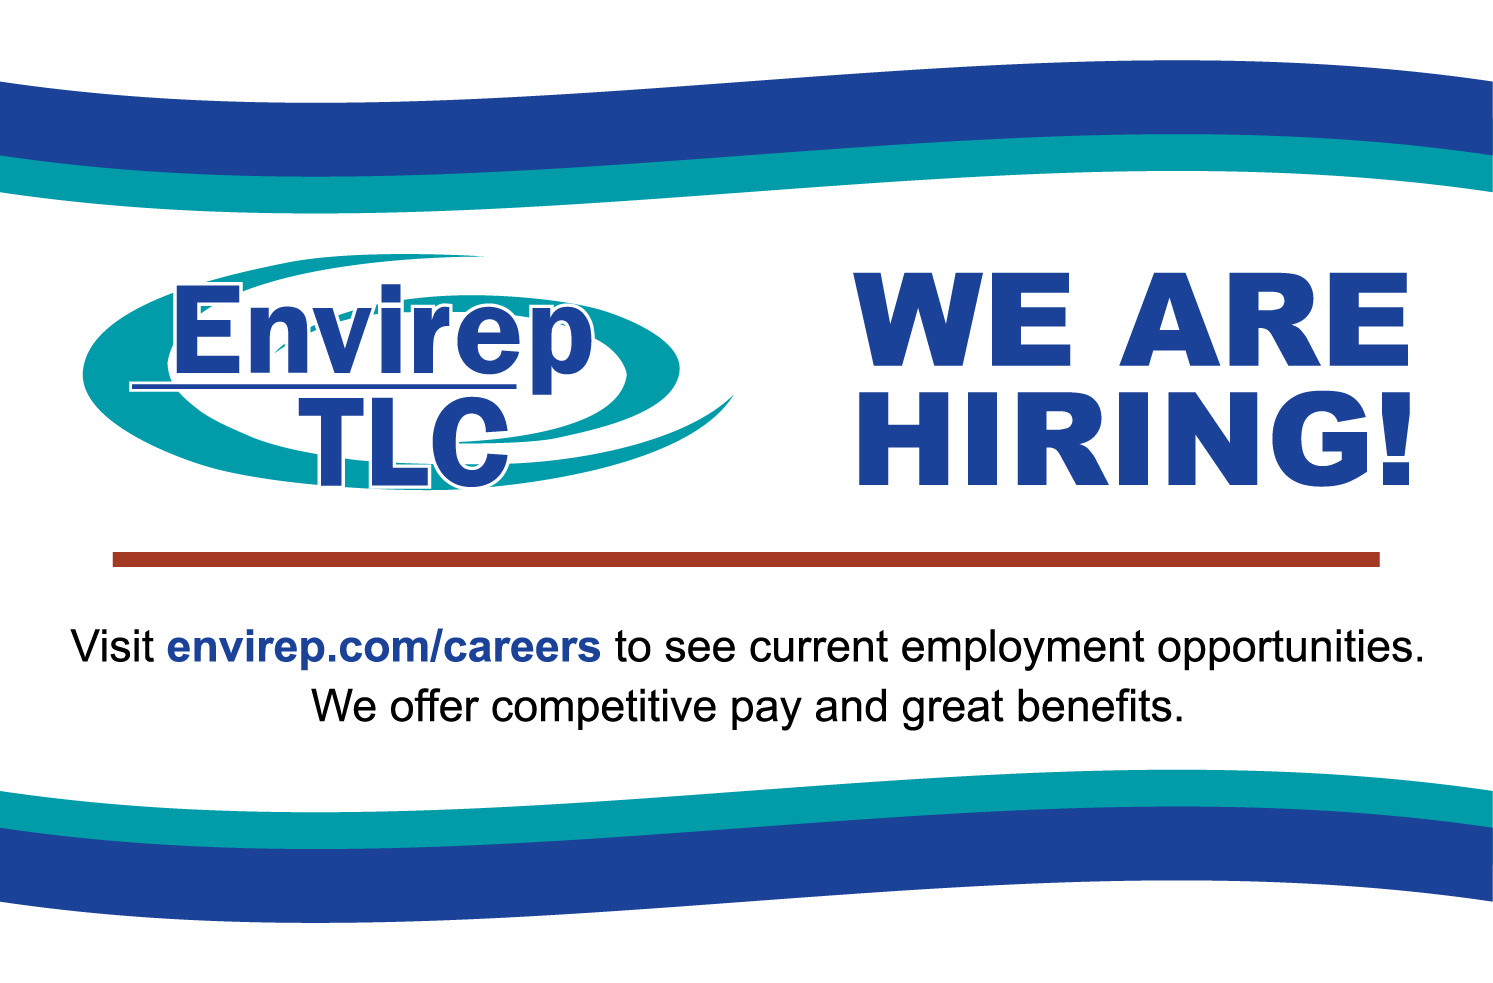 We are hiring! Visit envirep.com/careers to see current employment opportunities.